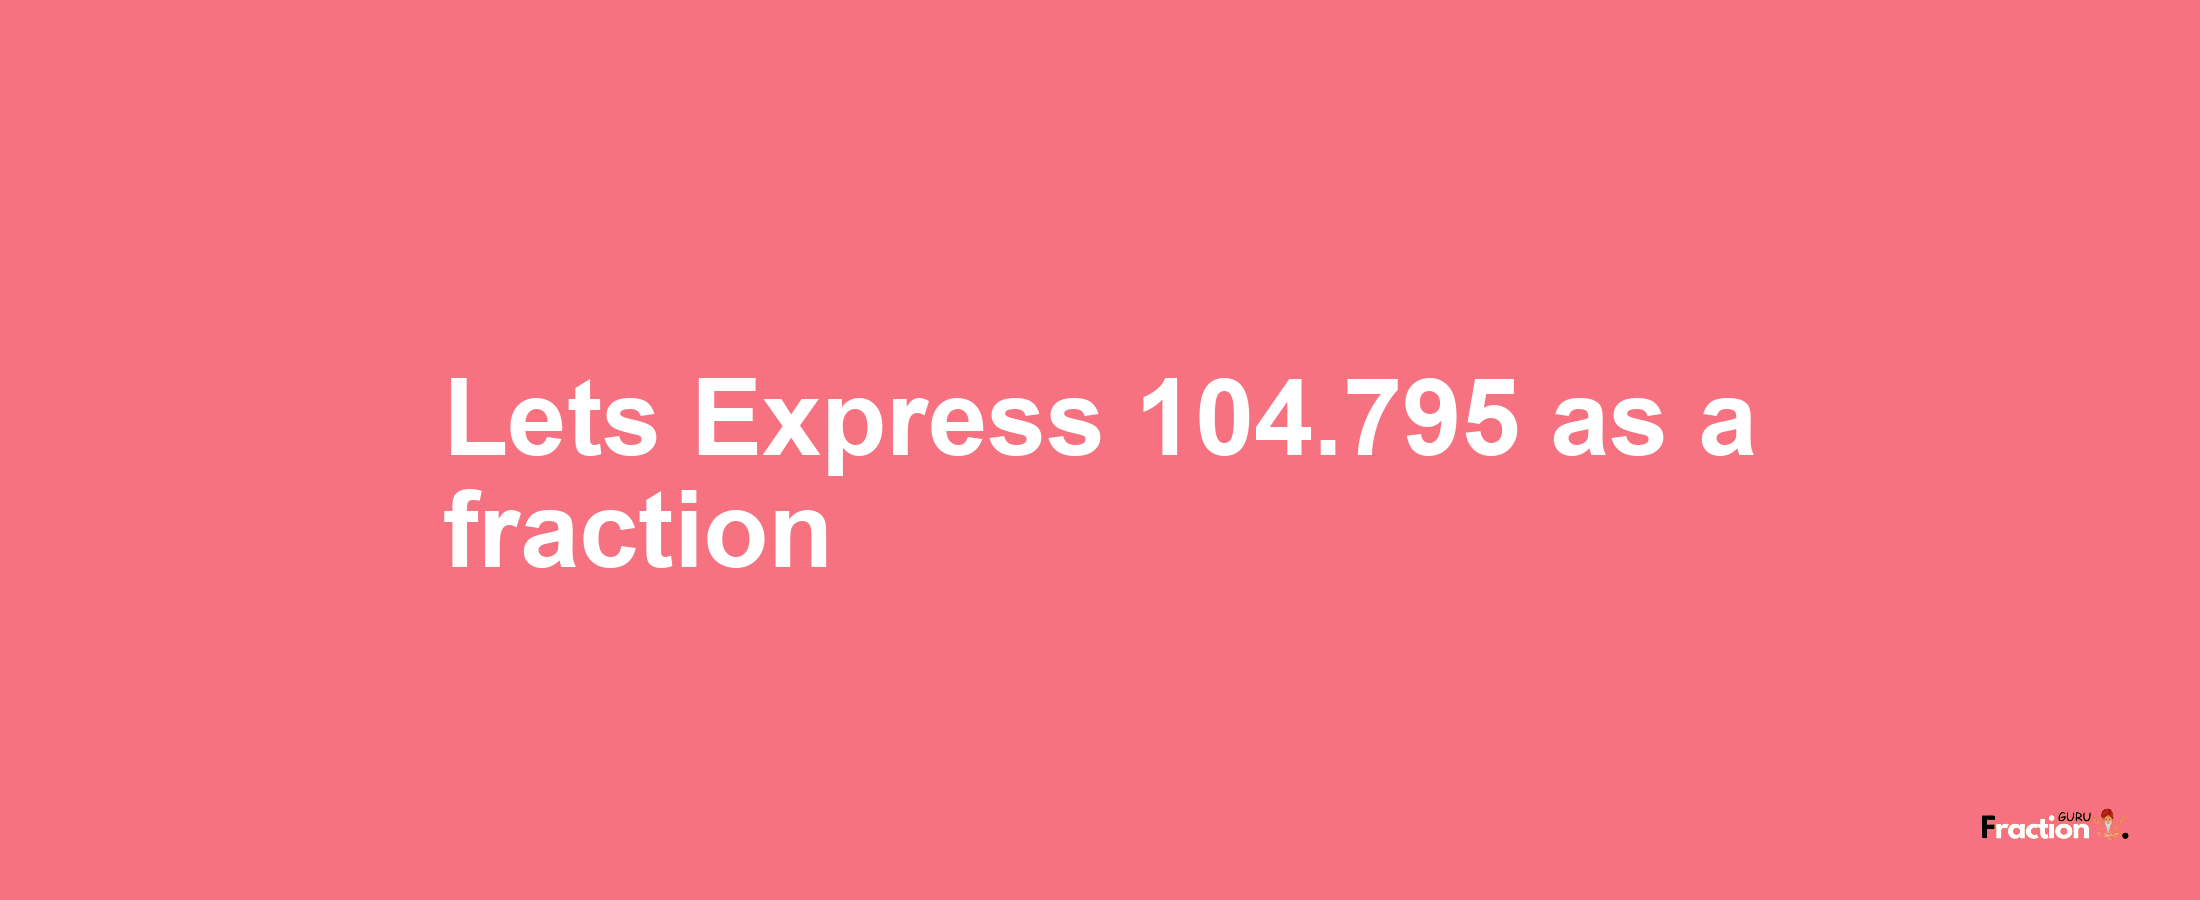 Lets Express 104.795 as afraction